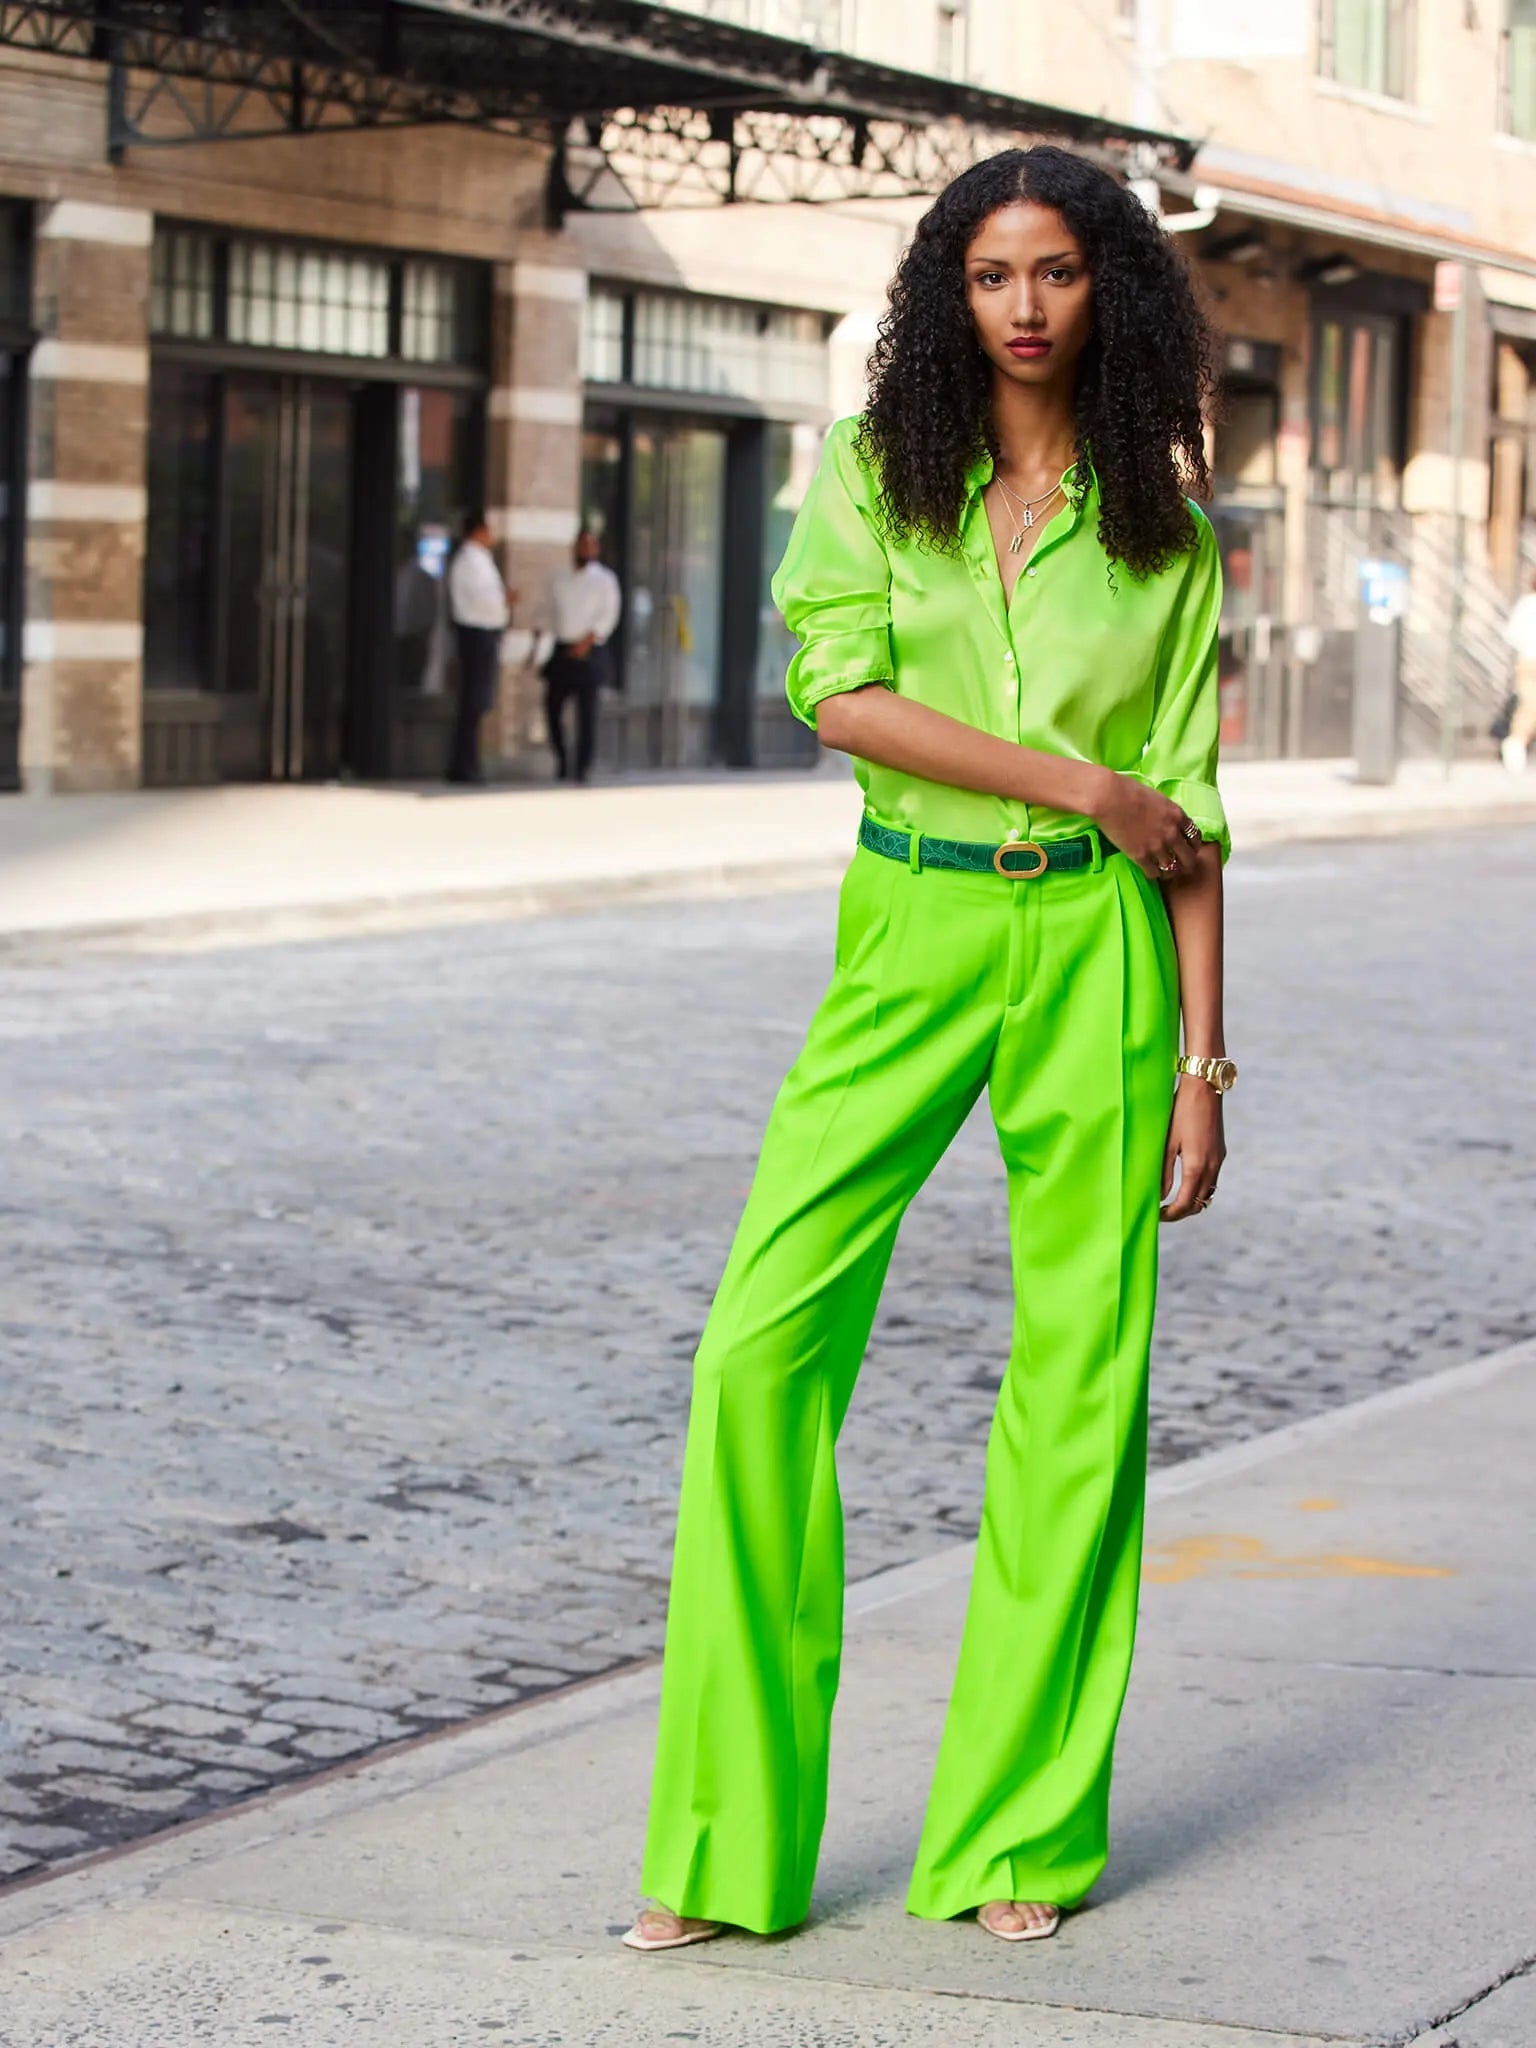 Lime Green Pants Outfit | Neon outfits, Neon fashion, Neon green outfits